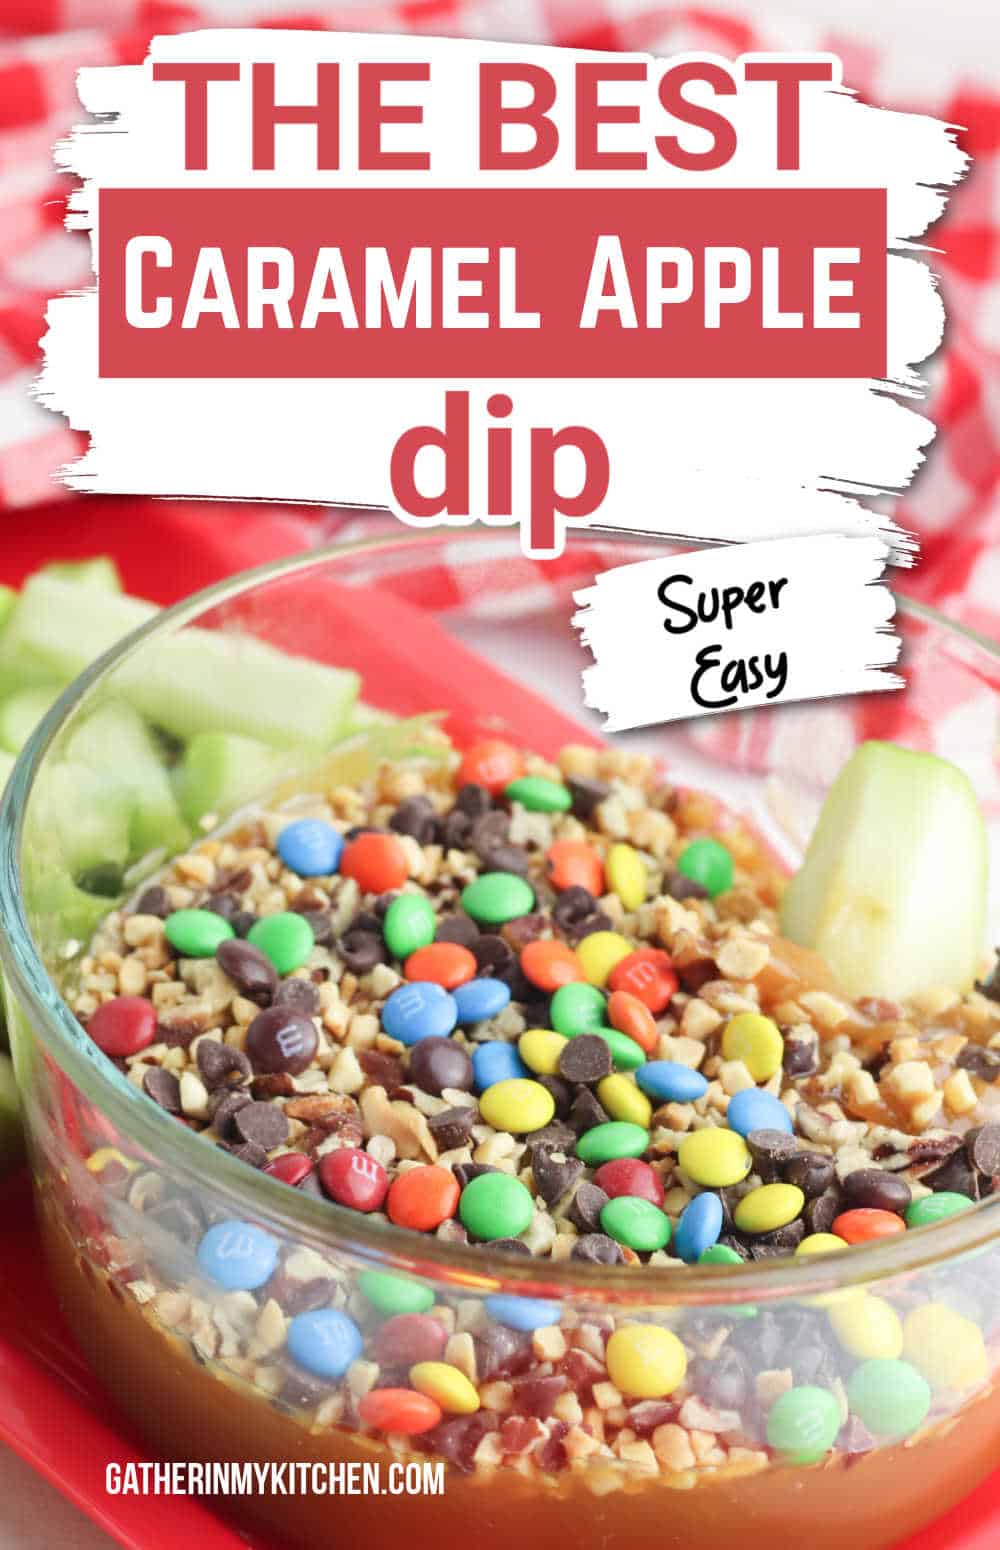 Pin image: top says "The Best Caramel Apple Dip" with a picture of caramel apple dip below.